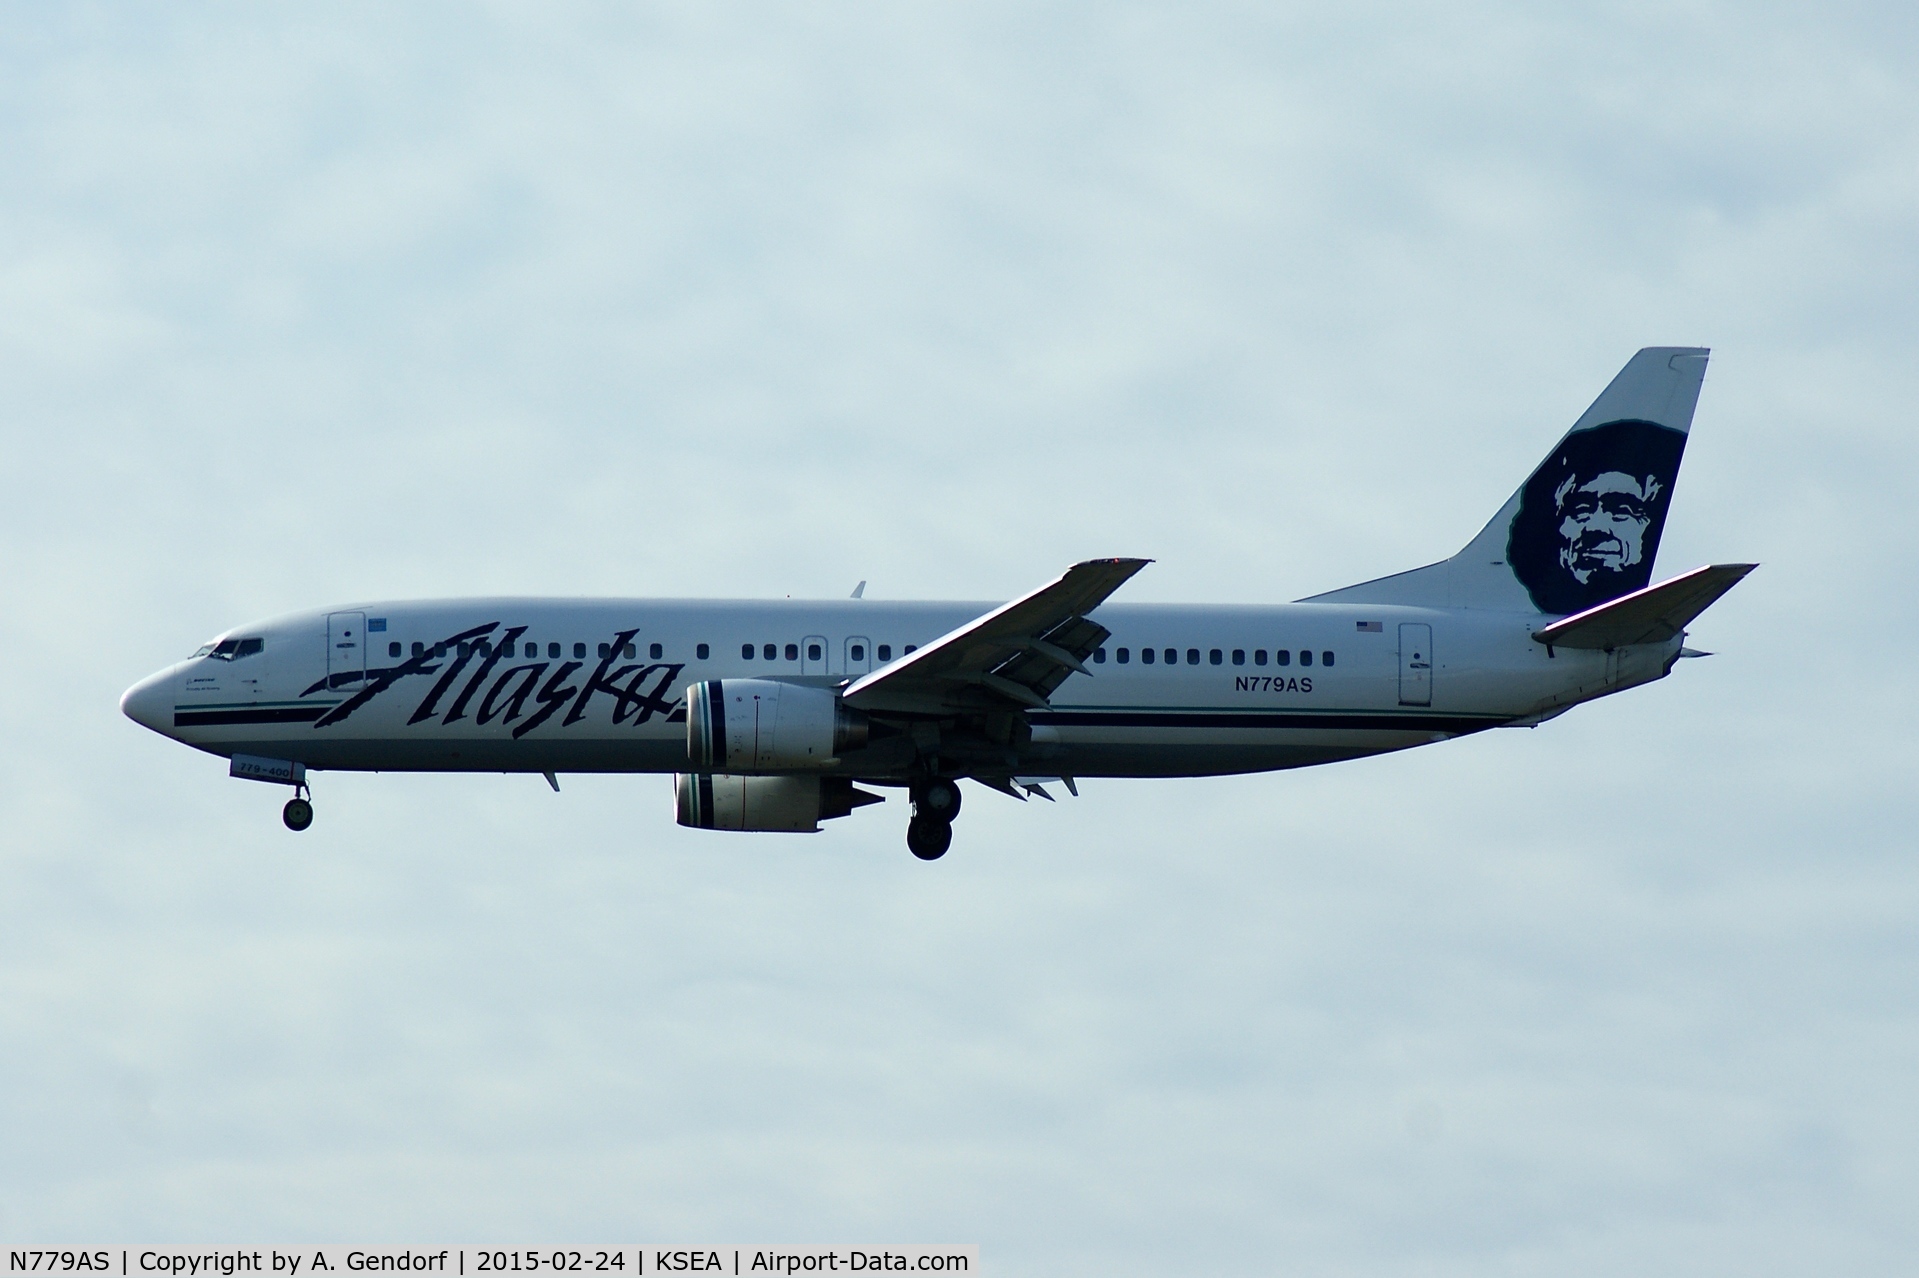 N779AS, 1994 Boeing 737-4Q8 C/N 25111, Alaska Airlines, is here on finals at Seattle-Tacoma Int'l(KSEA)